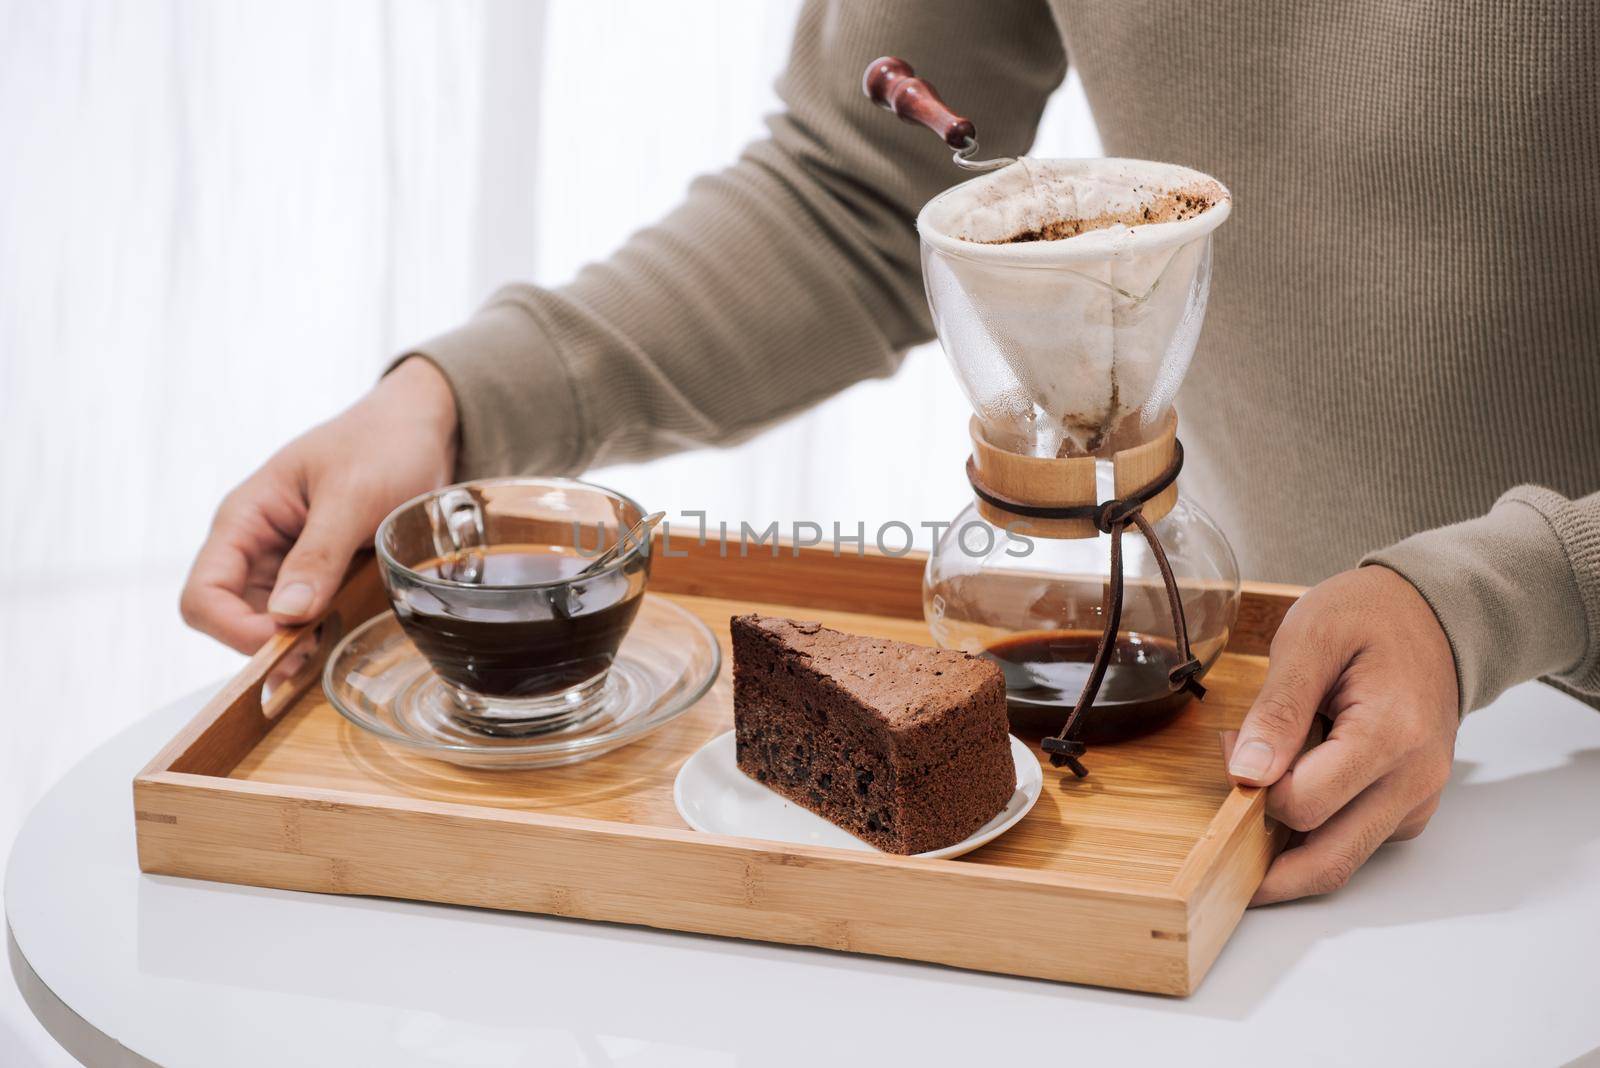 Drip coffee on wooden tray with chocolate cake. Coffee time on the cafe with natural light